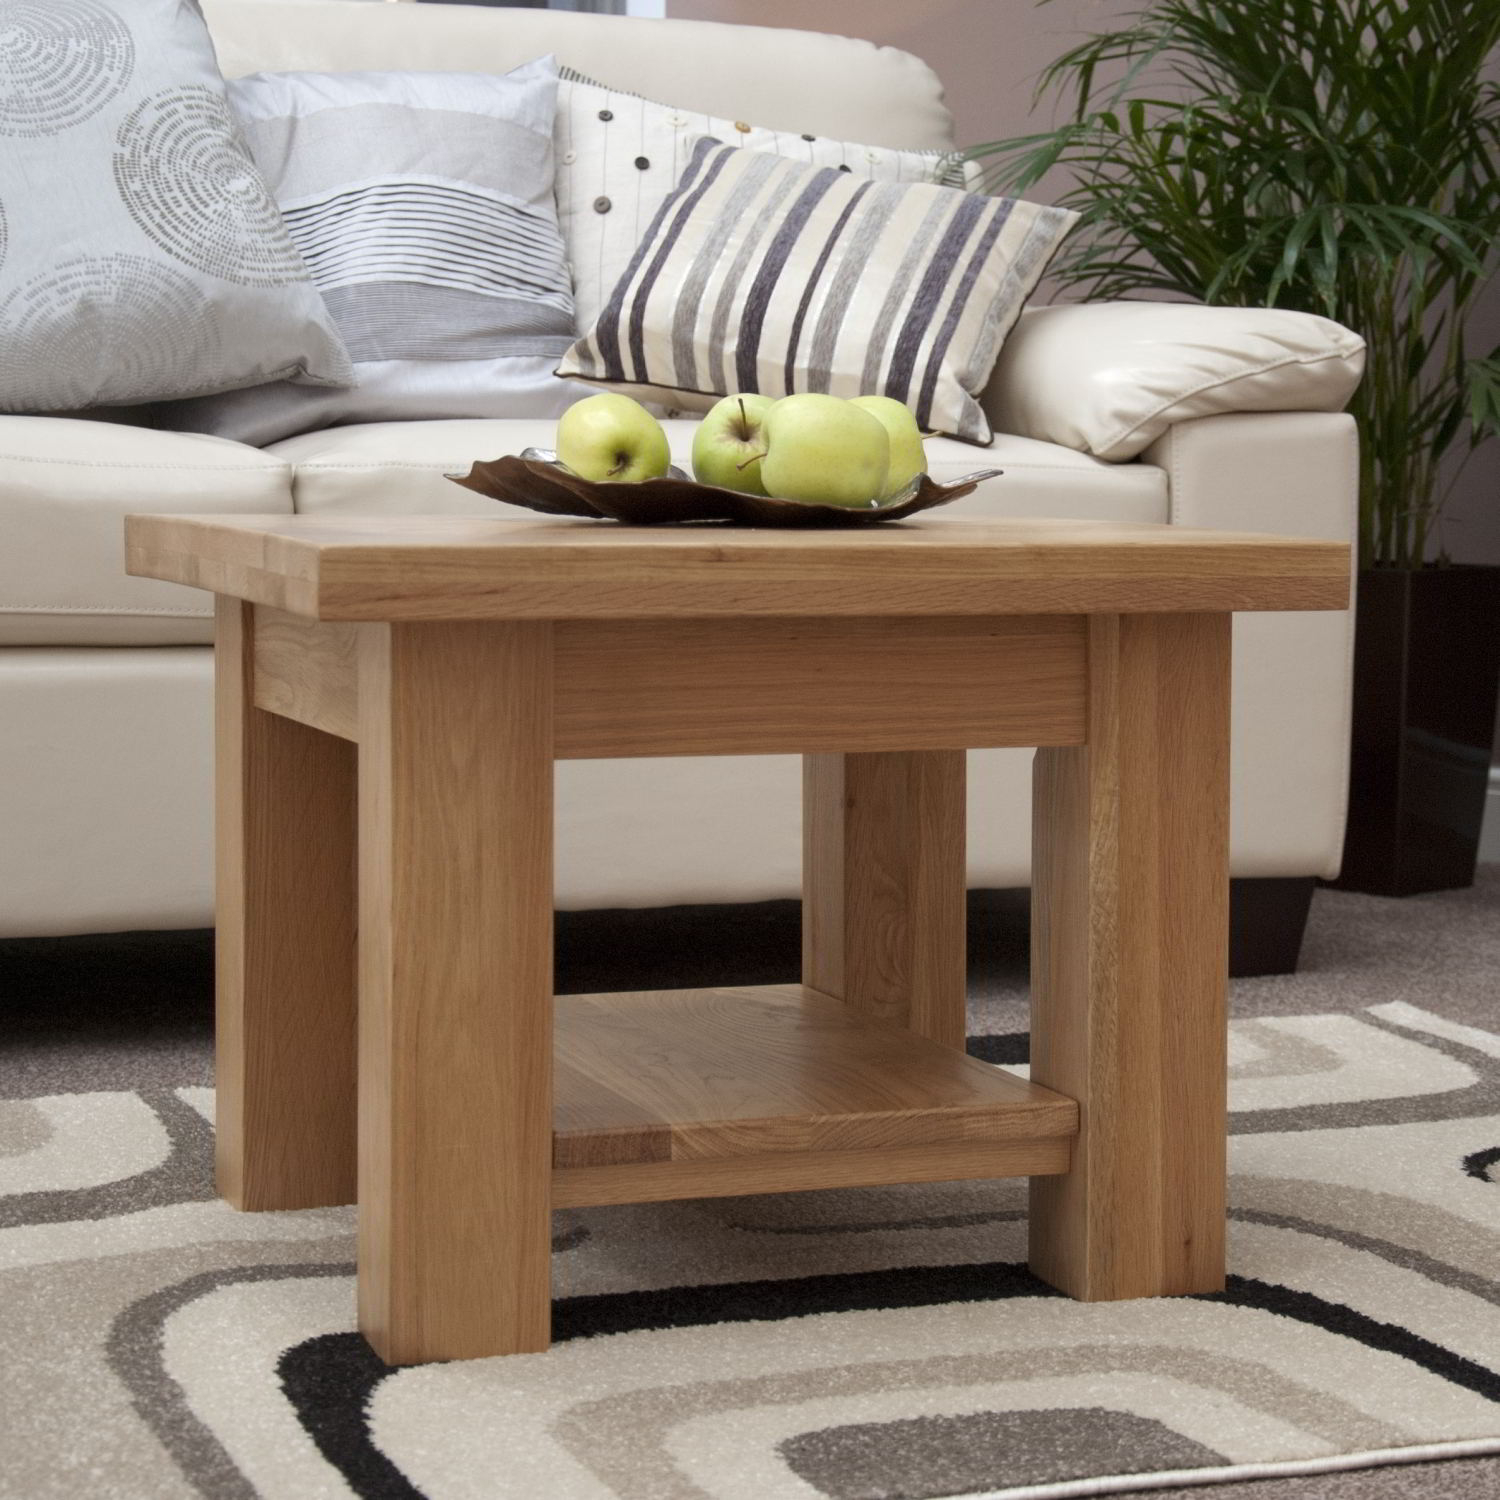 Kingston Solid Oak Living Room Lounge Furniture Small Square Coffee intended for size 1500 X 1500